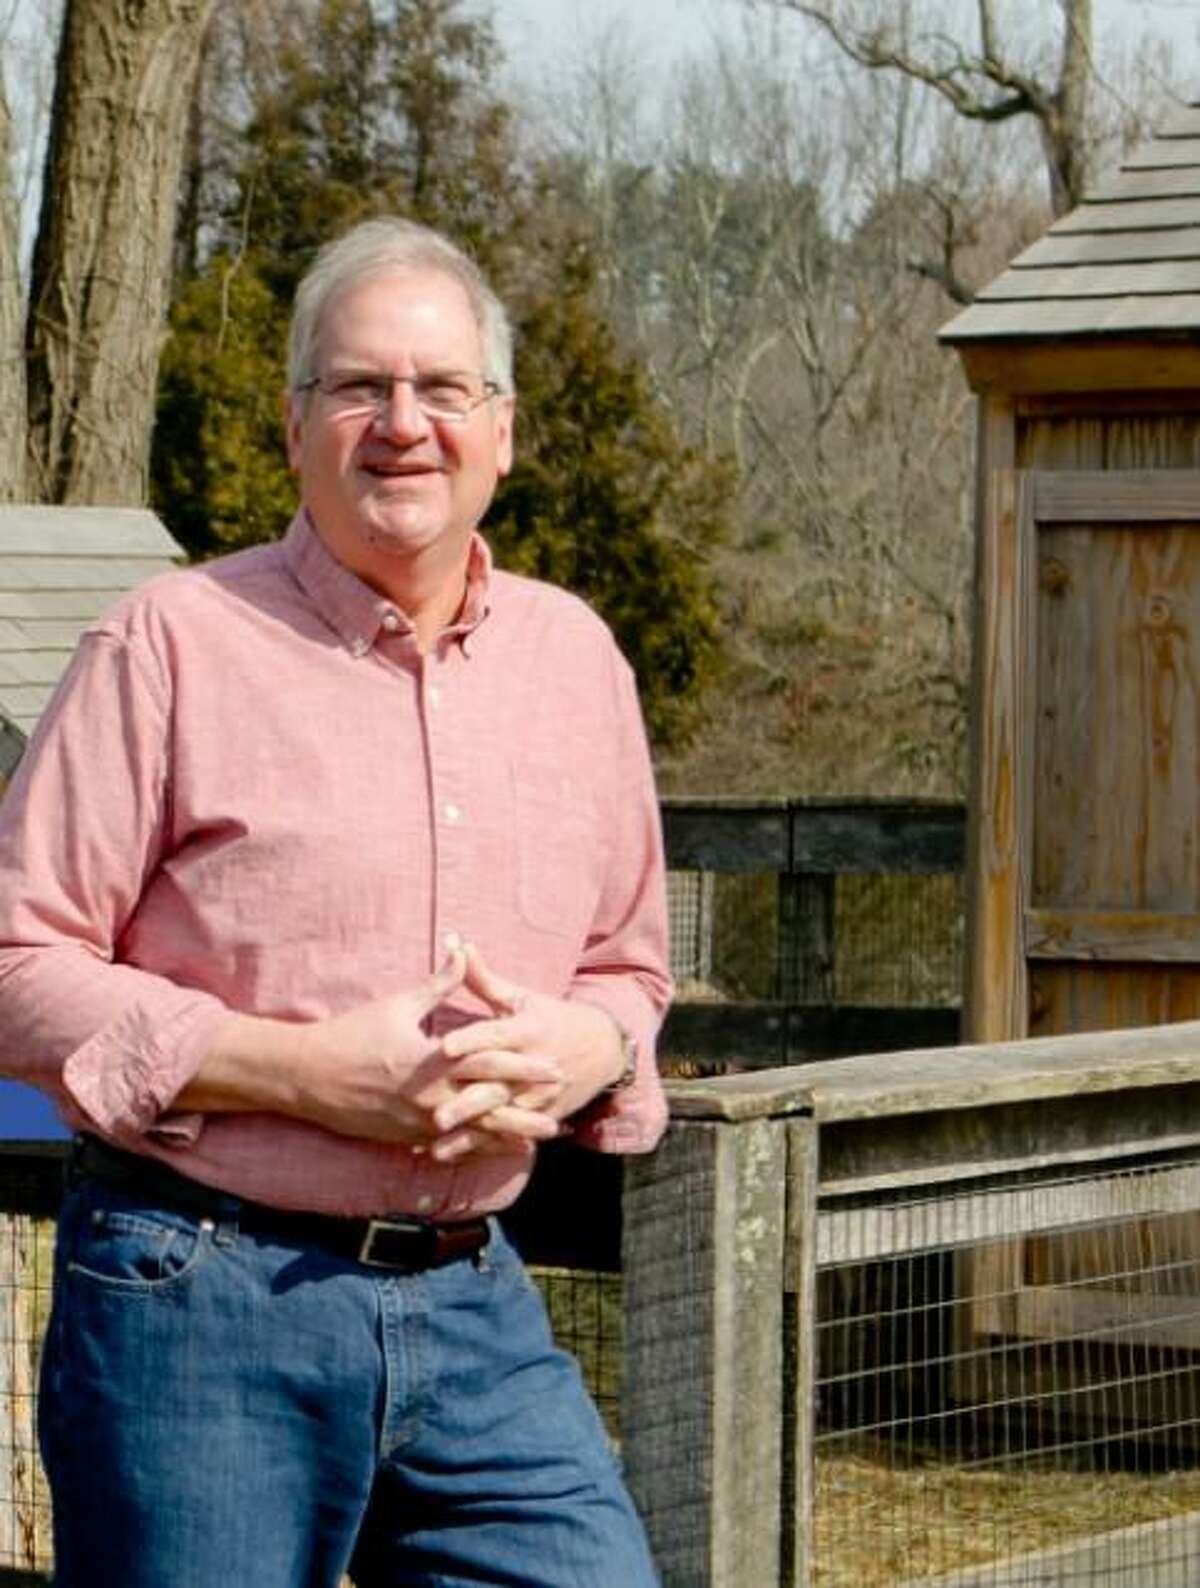 Wilton's Keith Denning announced Monday that is seeking election to represent the 42nd House District that includes Wilton and parts of New Canaan and Ridgefield.